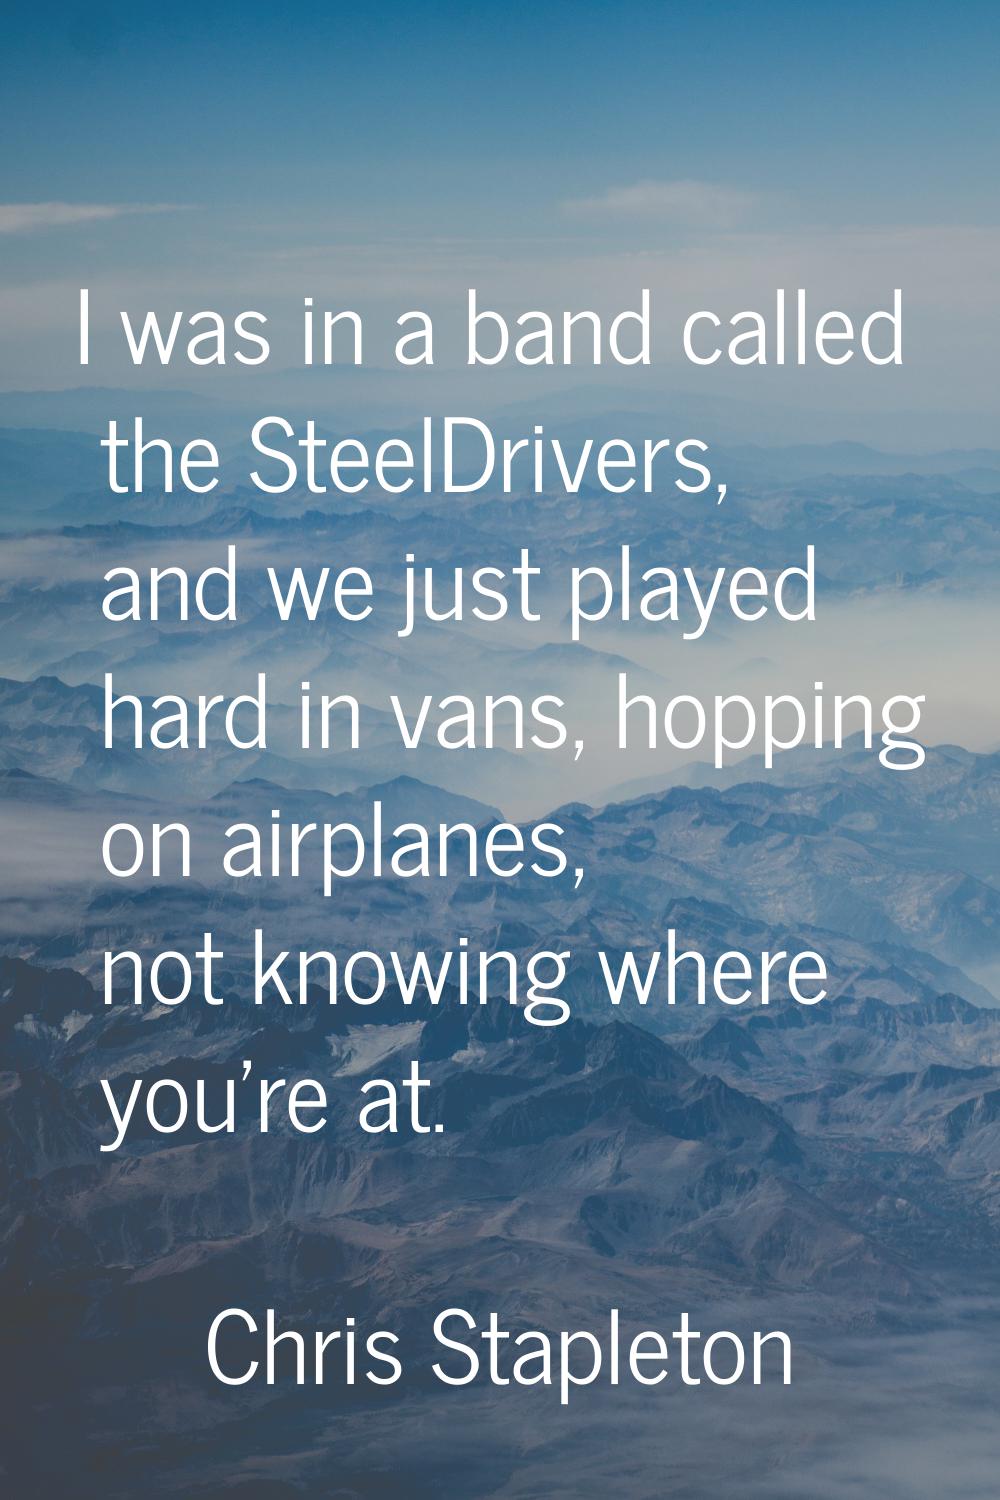 I was in a band called the SteelDrivers, and we just played hard in vans, hopping on airplanes, not